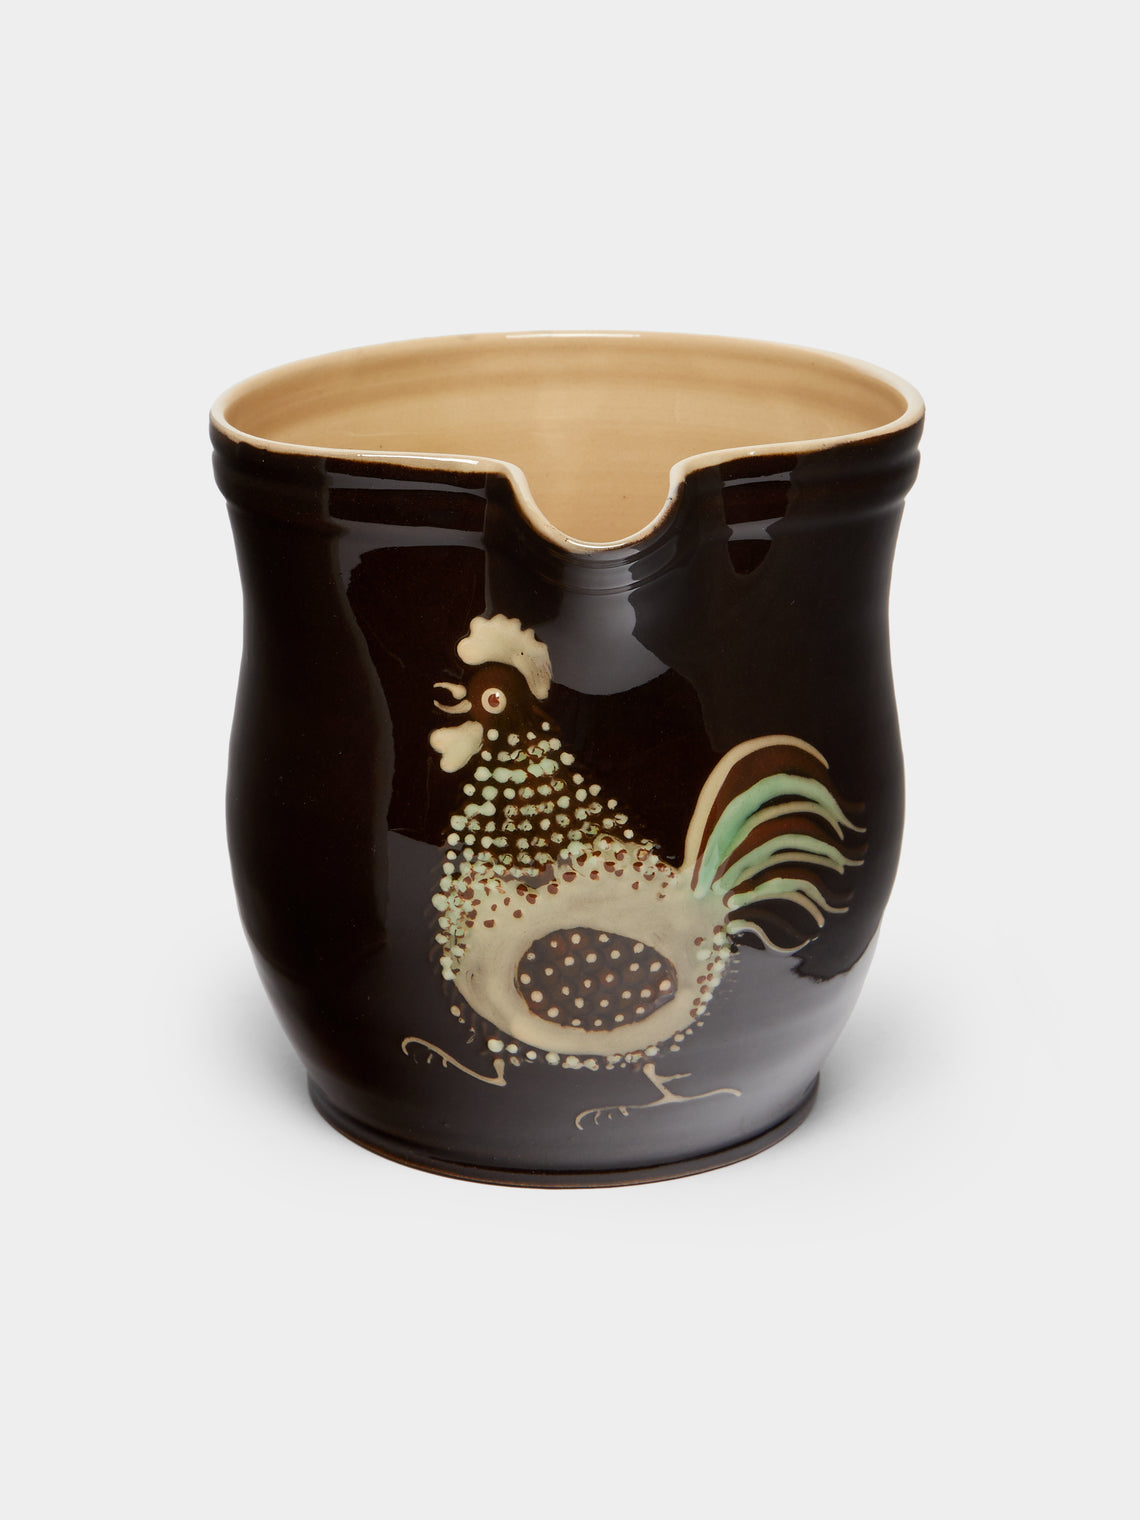 Poterie d’Évires - Chickens Hand-Painted Ceramic Rounded Jug -  - ABASK